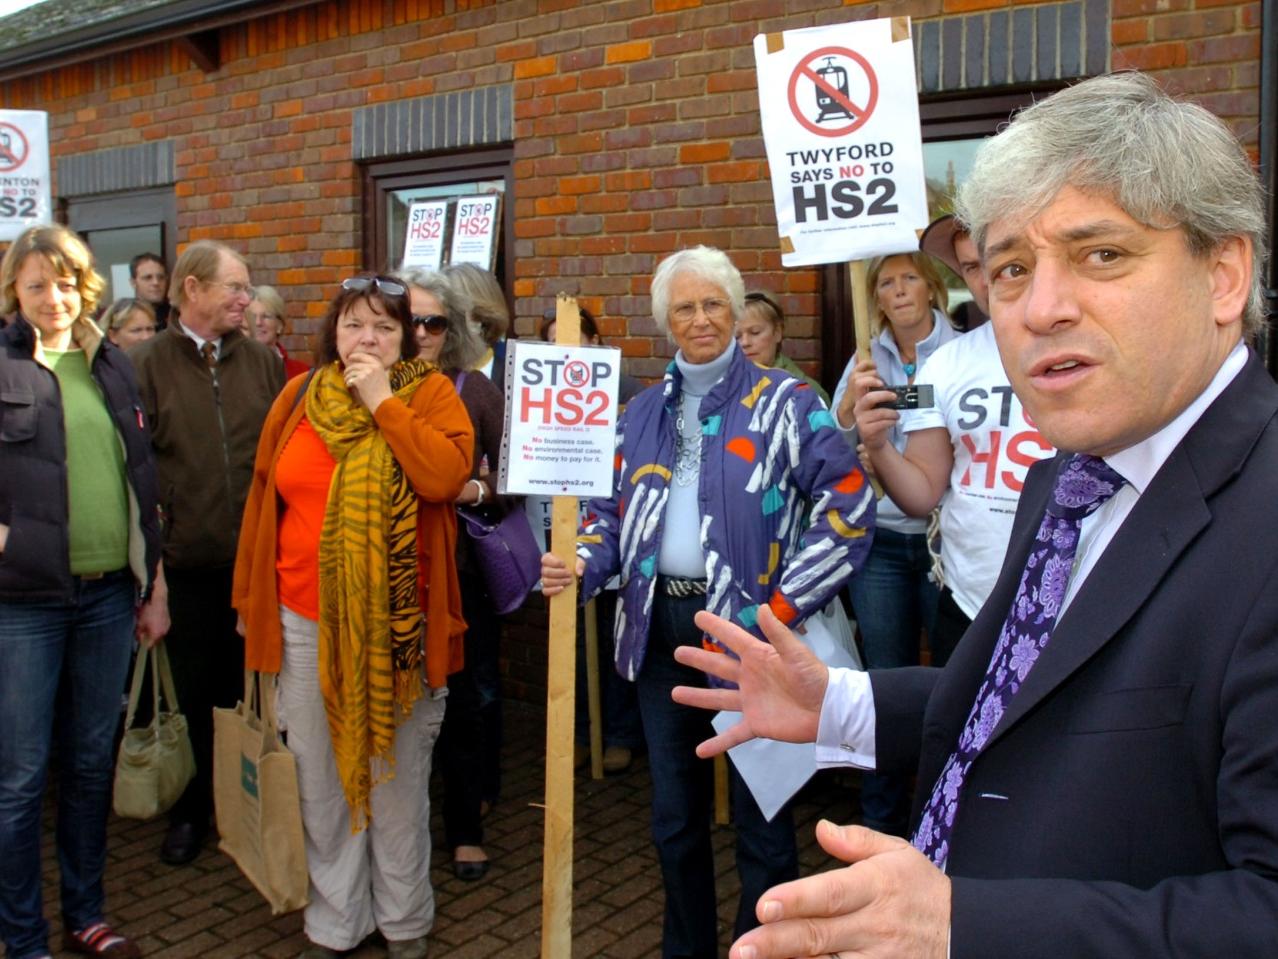 Supporting anti-HS2 campaigners at a demonstration in Buckingham